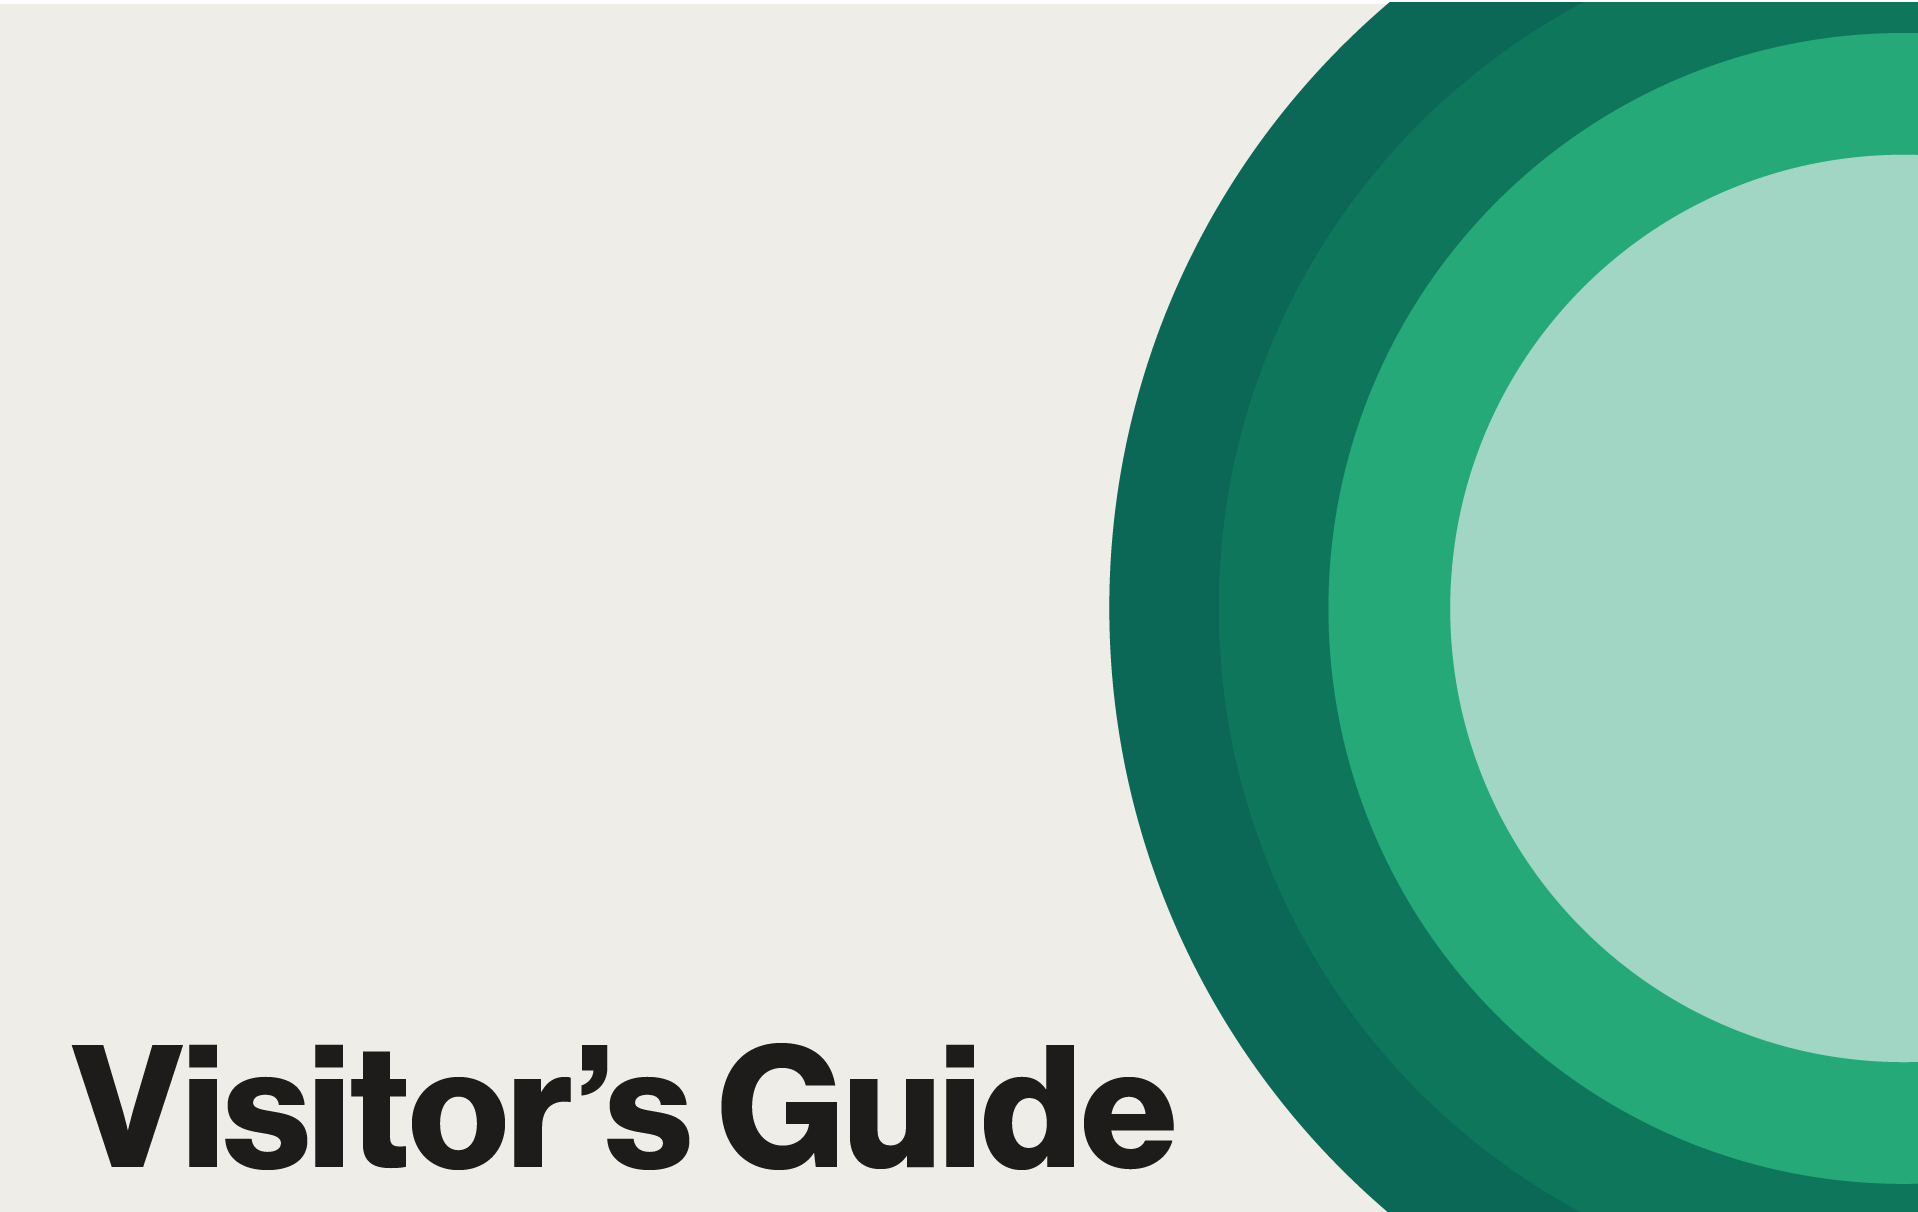 Visitor's Guide Clickable Graphic